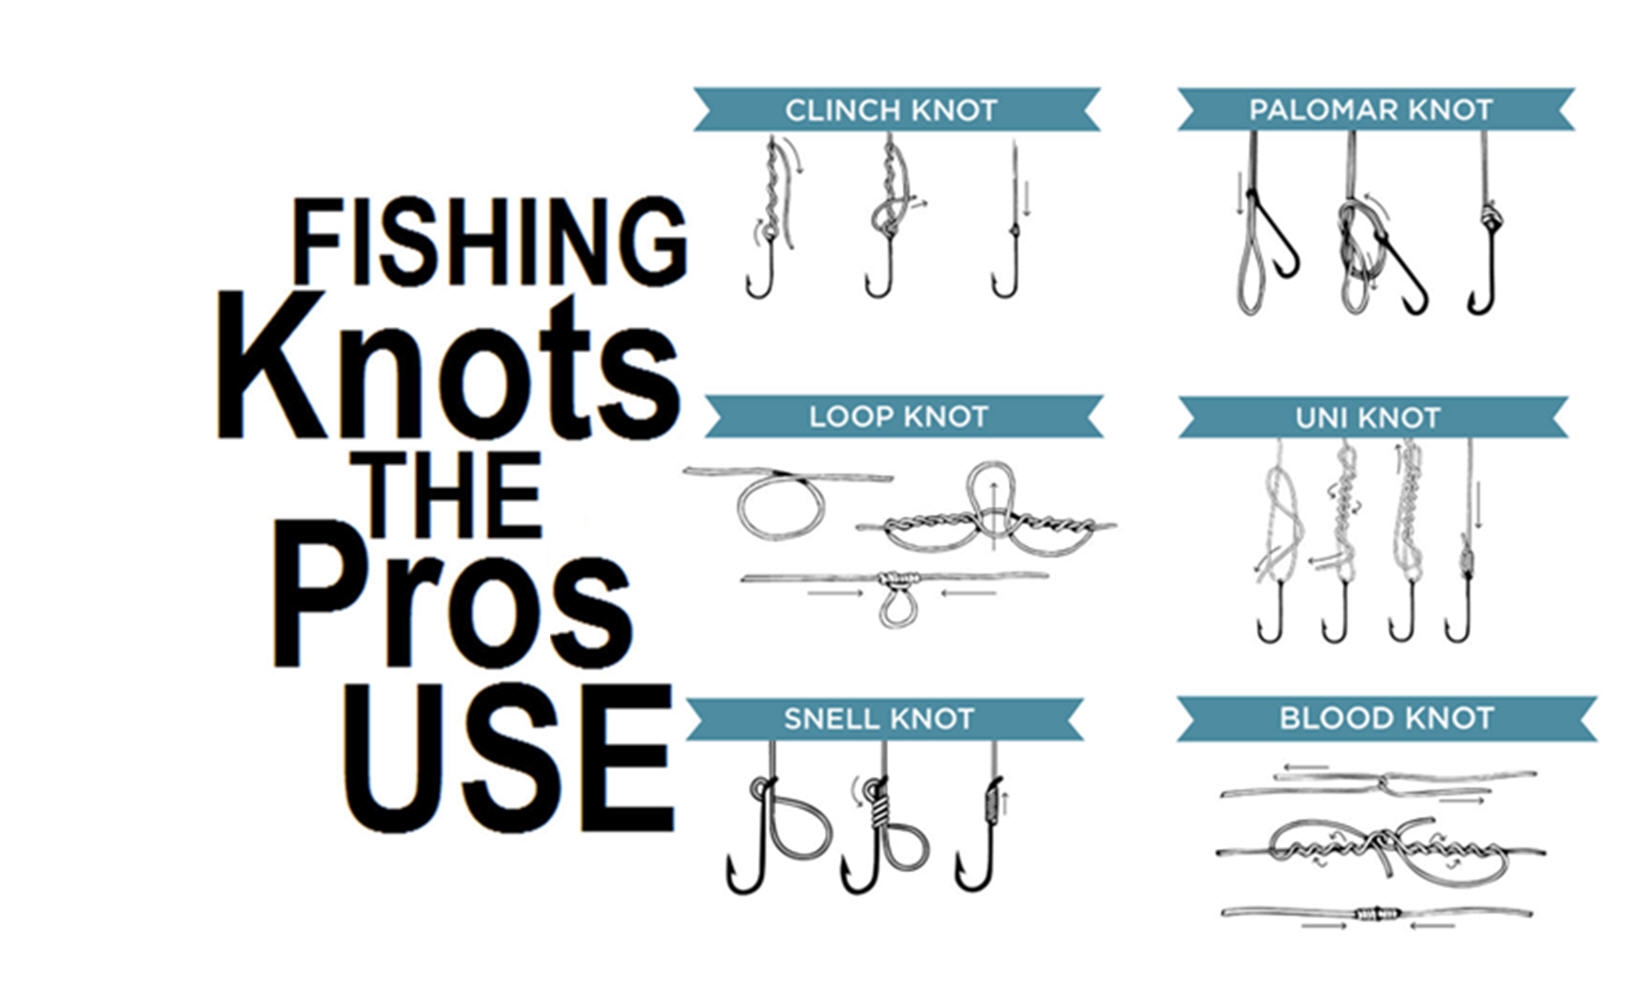 What the Pros Say: What is Your Go-To Fishing Knot? (video)